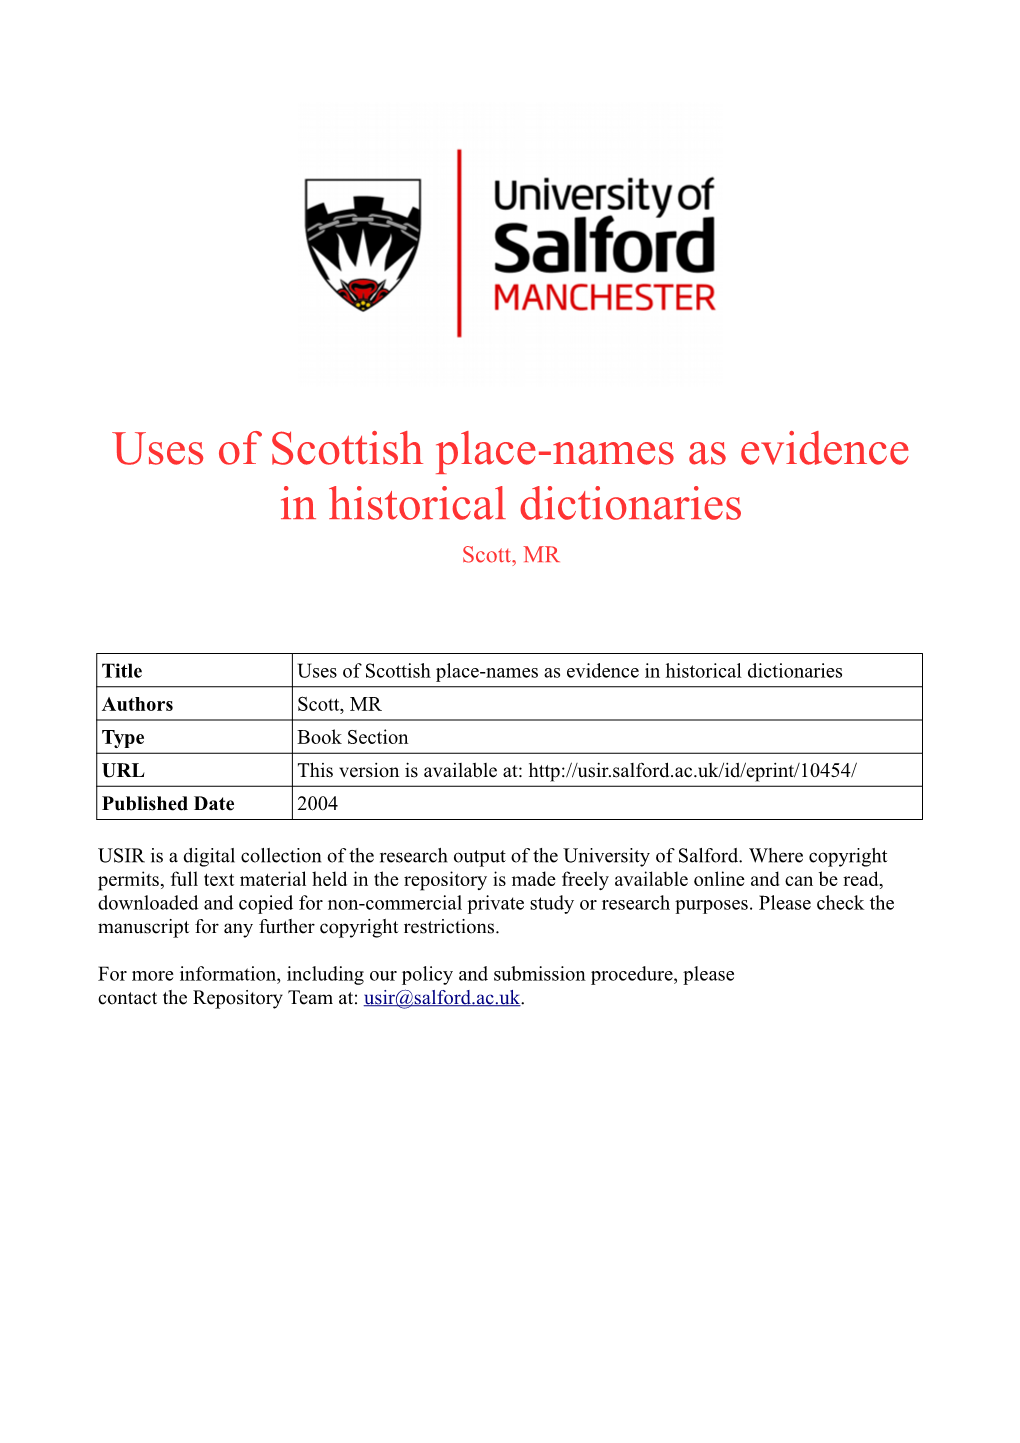 Uses of Scottish Placenames As Evidence in Historical Dictionaries